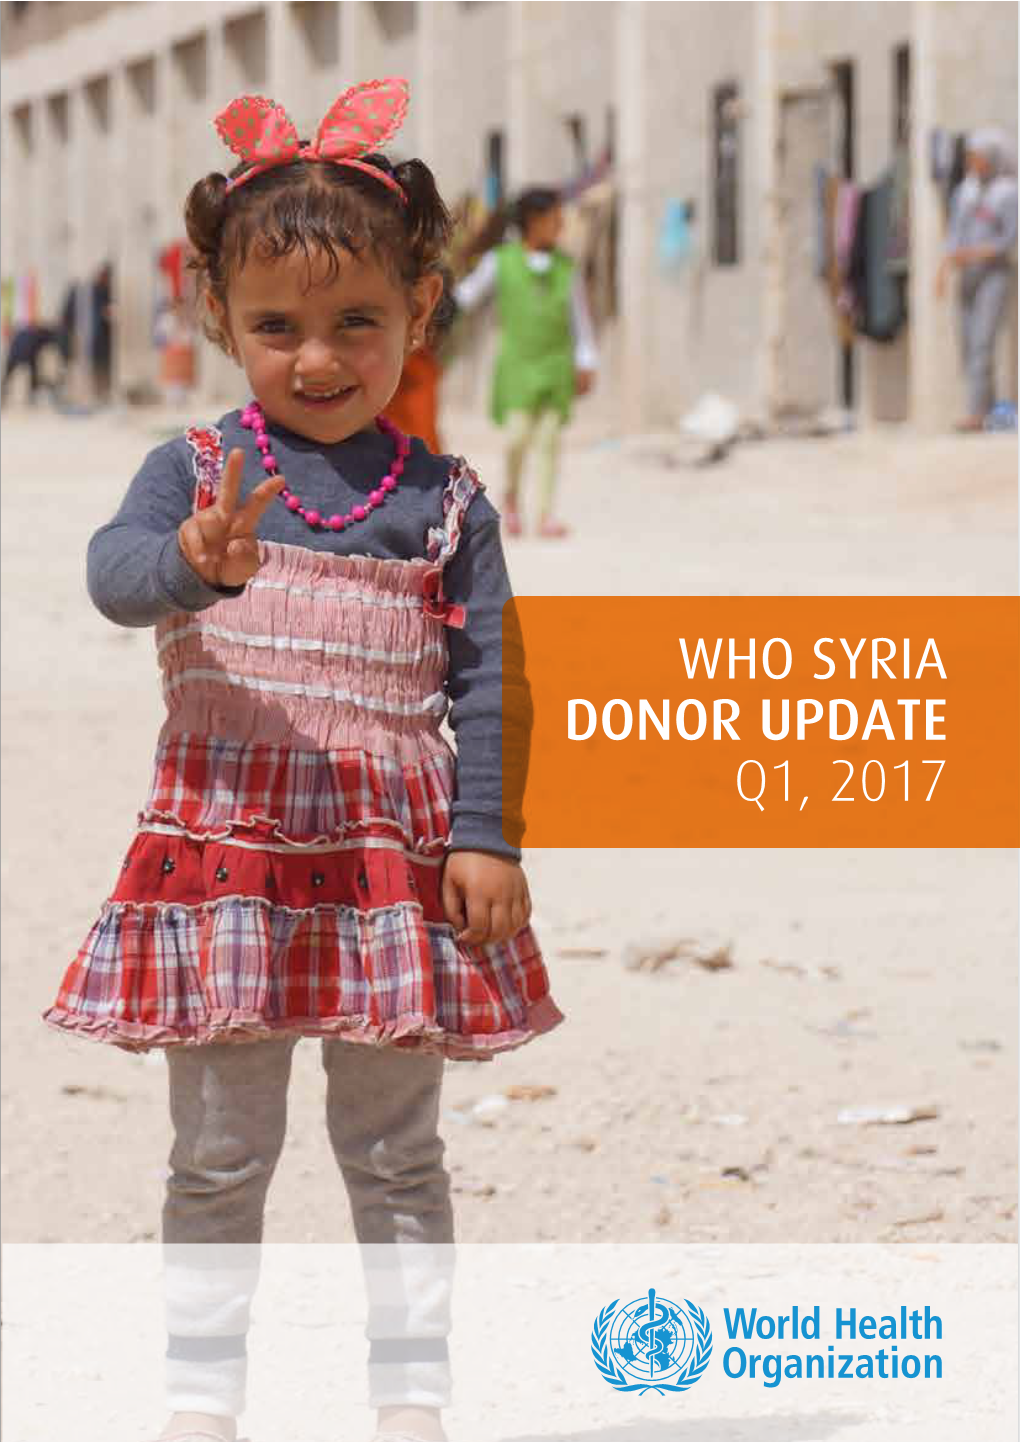 Who Syria Donor Update Q1, 2017